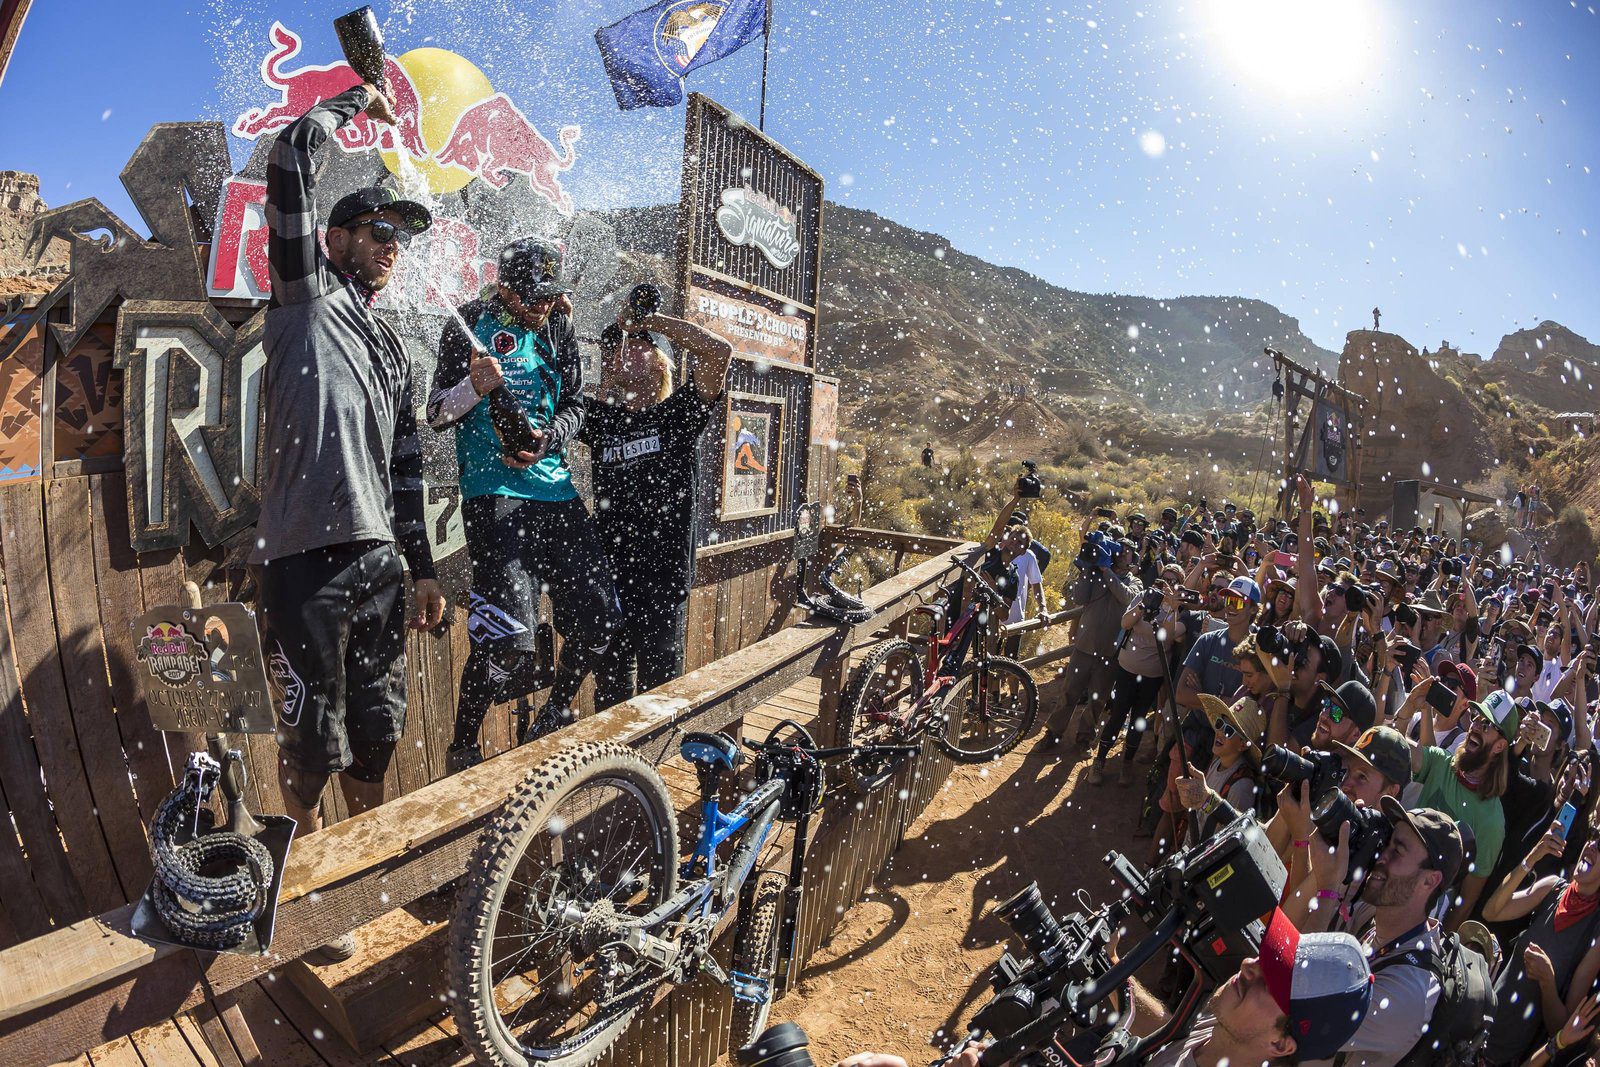 (Re)Watch Red Bull Rampage 2018 live from home Canadian Cycling Magazine